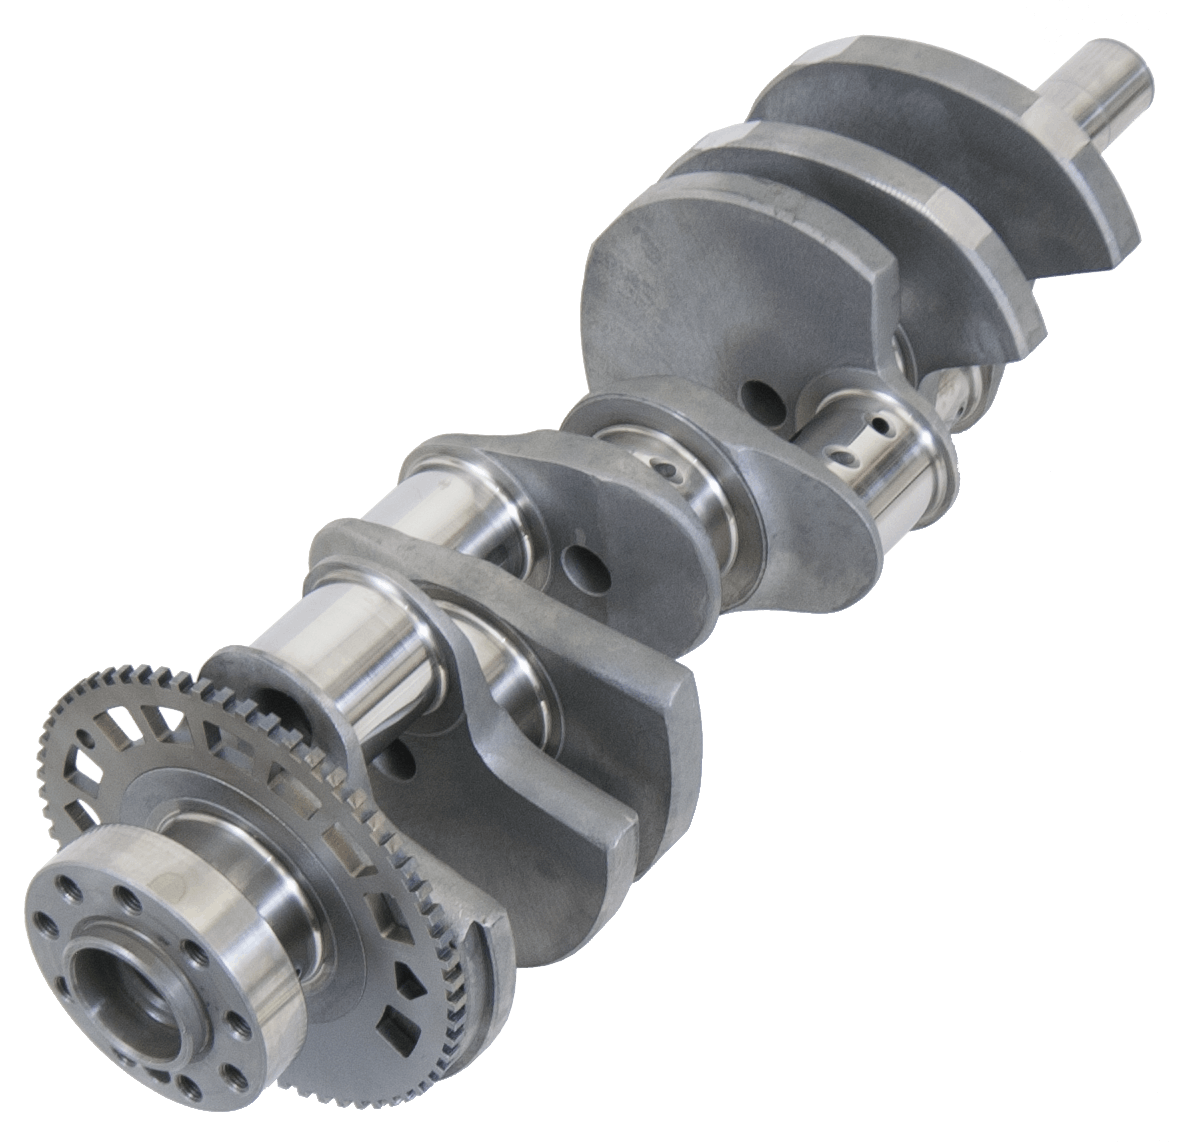 Eagle Specialty Products 442540006100 Forged 4340 Steel Crankshaft